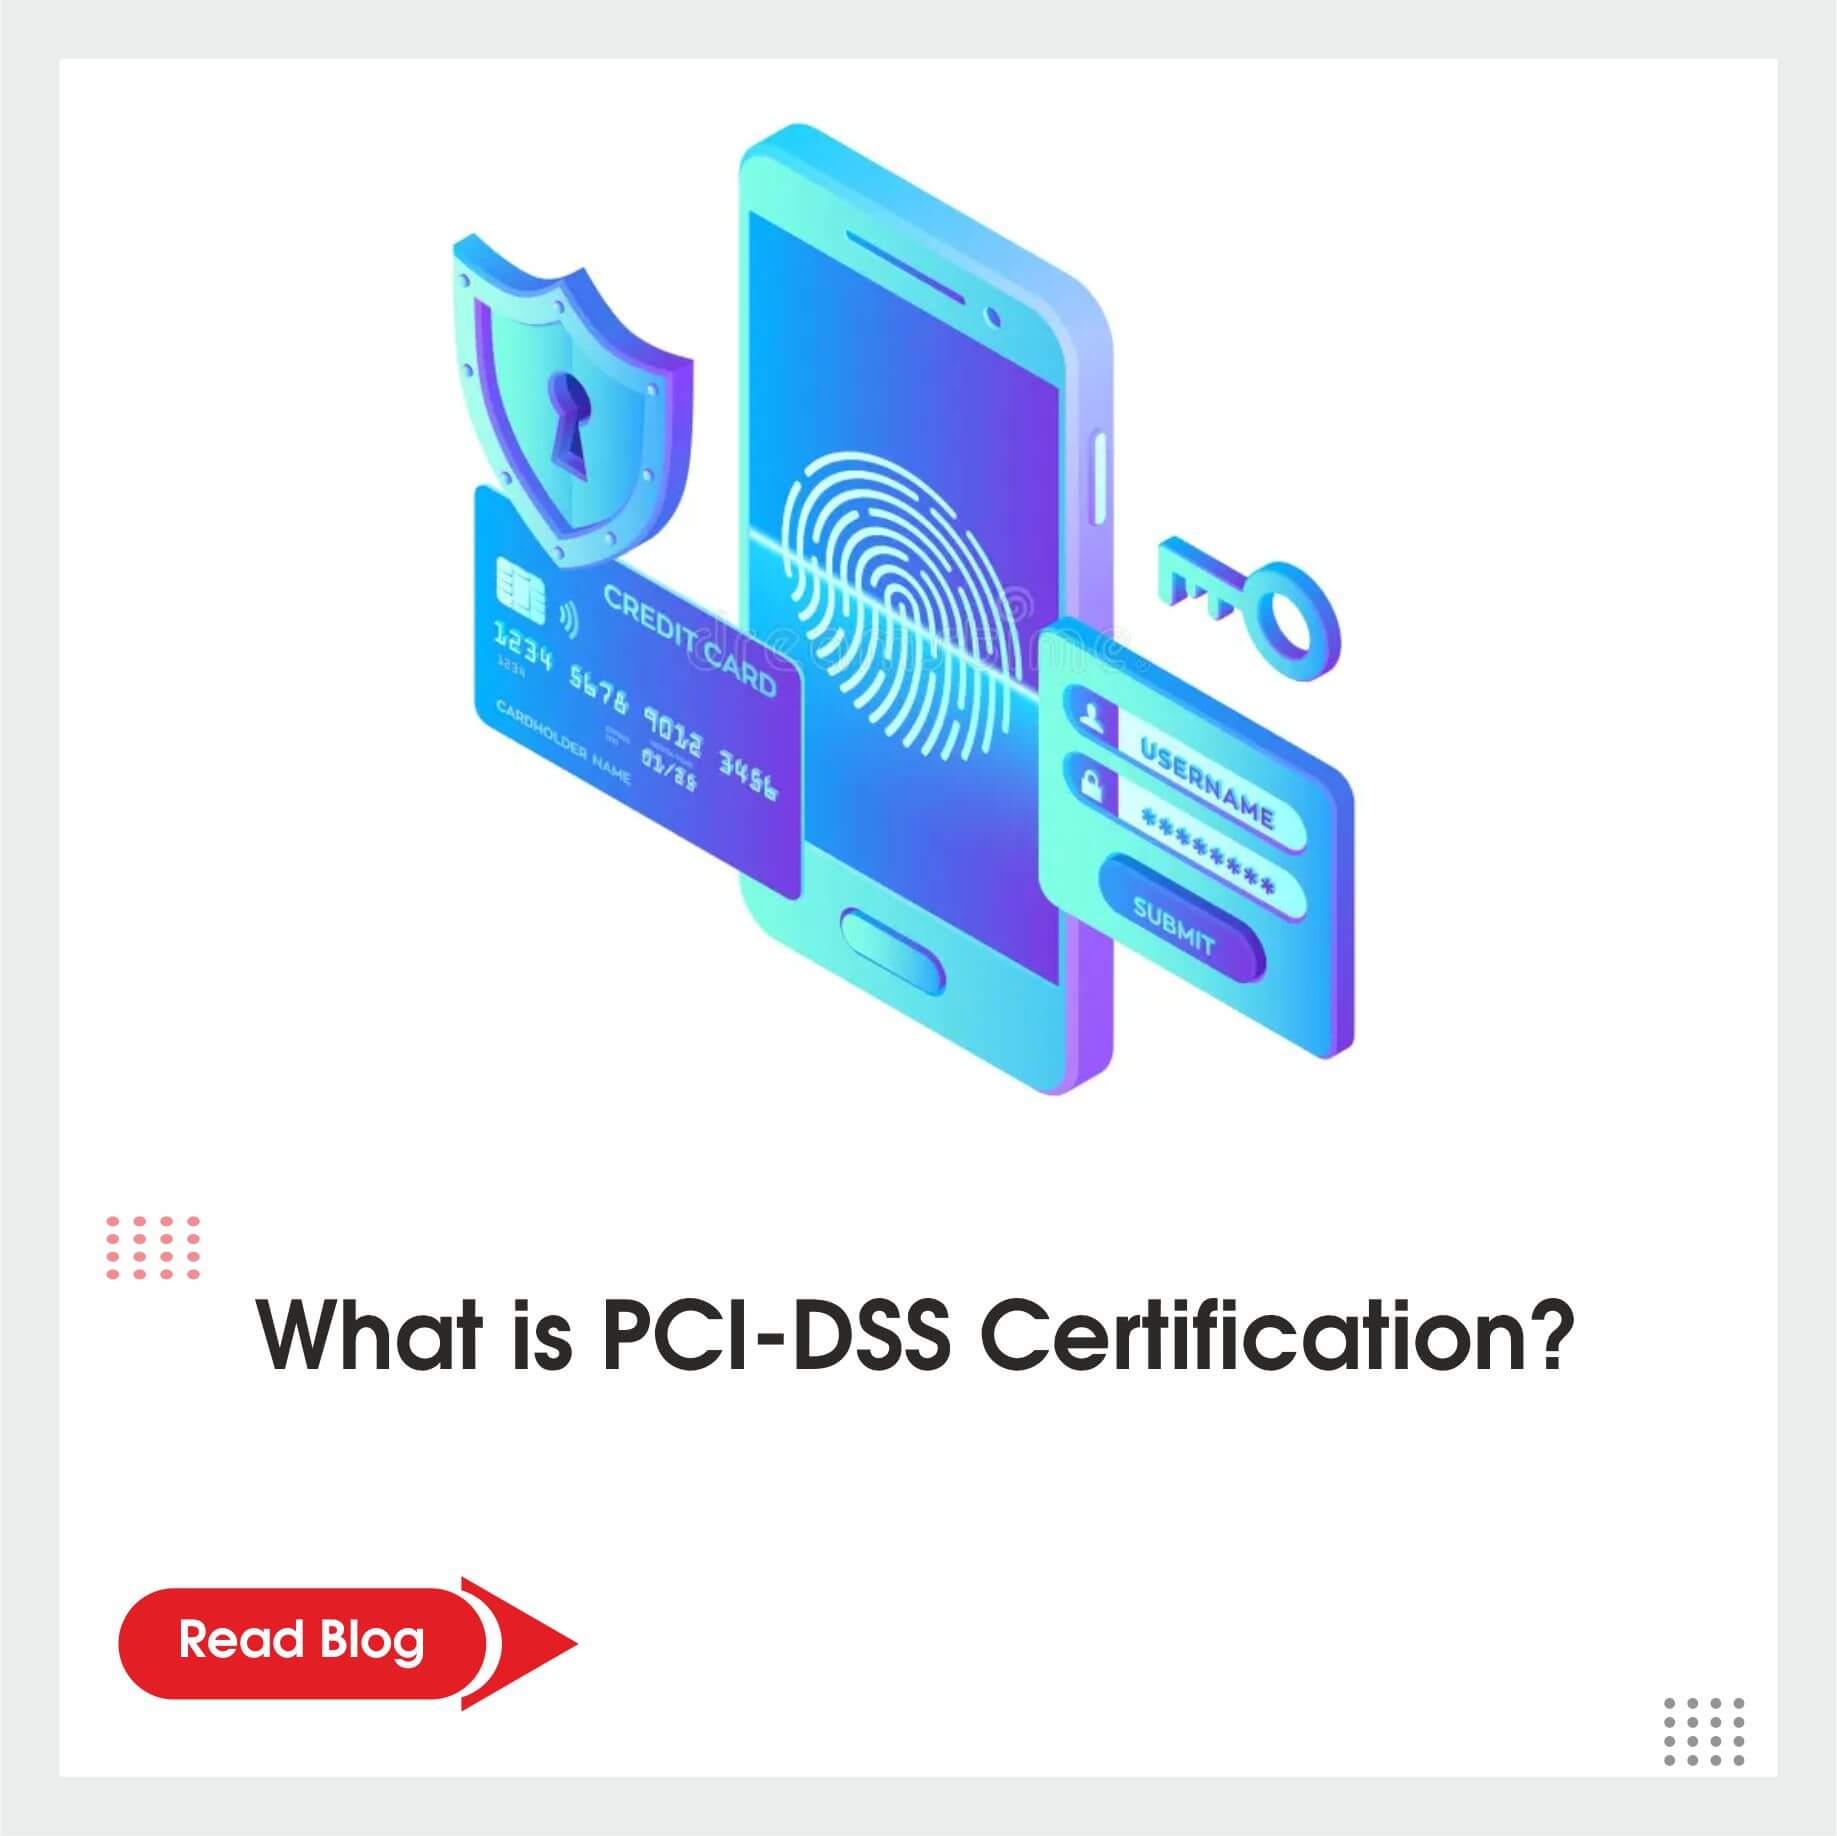 What is PCI-DSS Certification